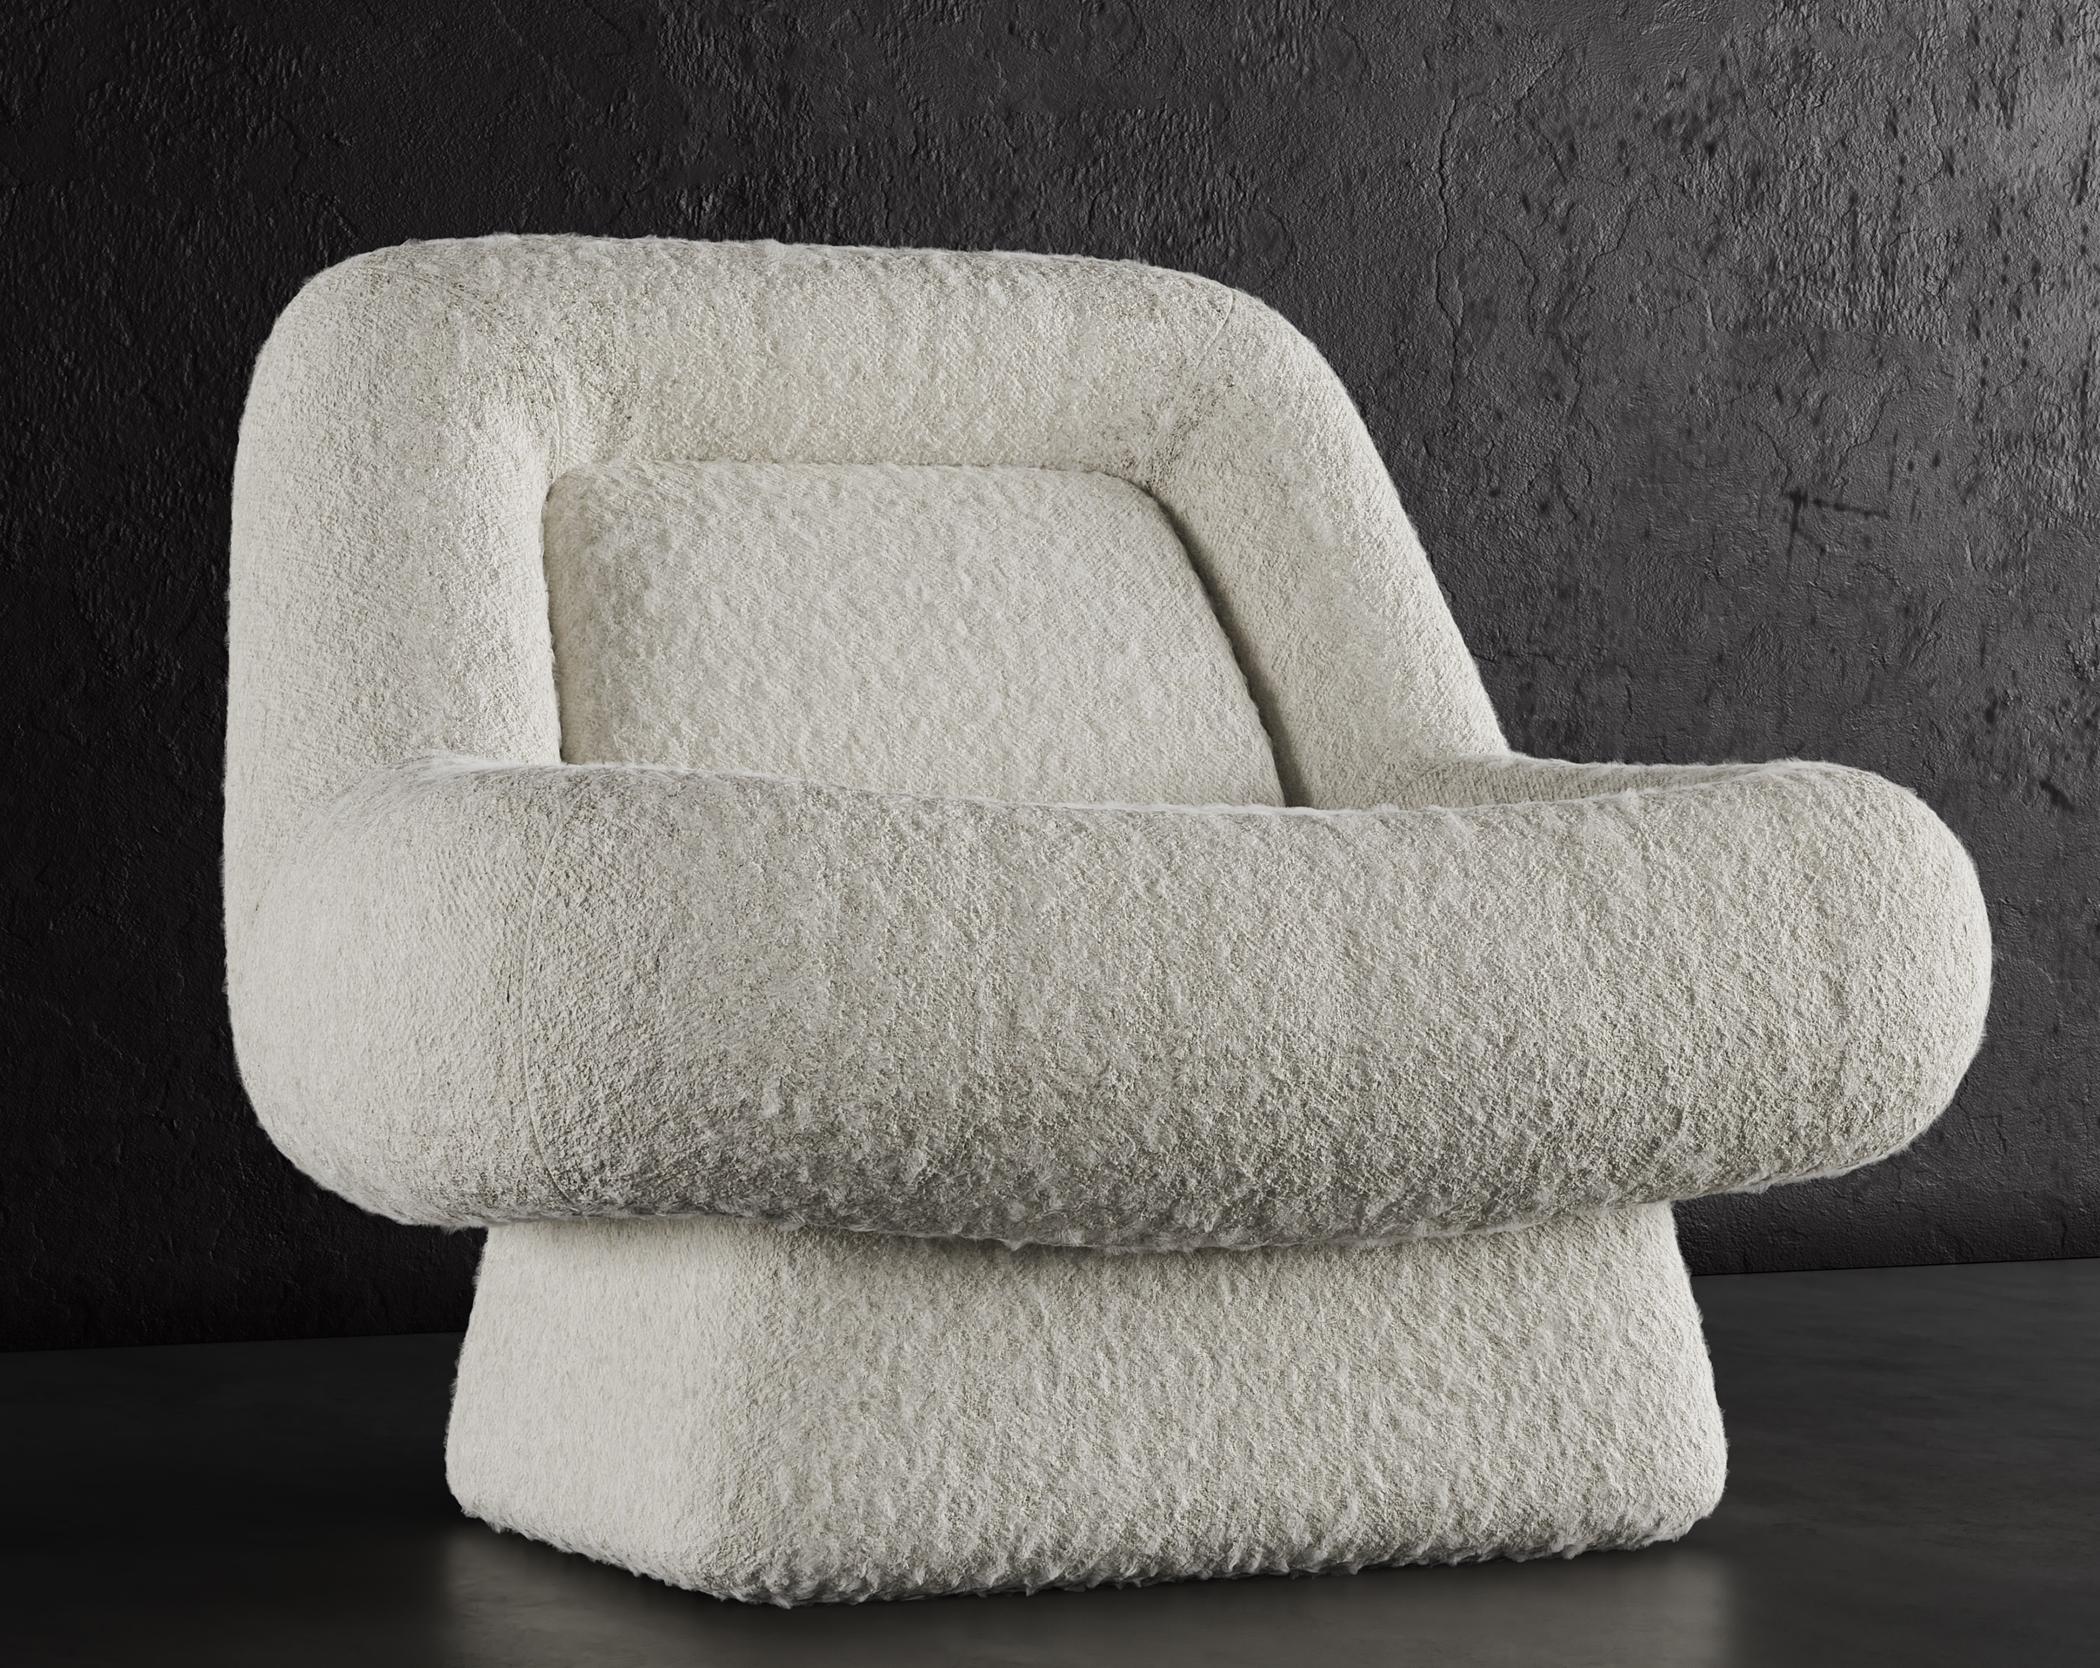 WAVE CHAIR - Modern Design in Cloud Boucle in Warm White

The Wave Lounge Chair is a modern and stylish piece of furniture that will add a touch of elegance to any room. It is upholstered in a luxurious cloud boucle fabric in warm white, which not